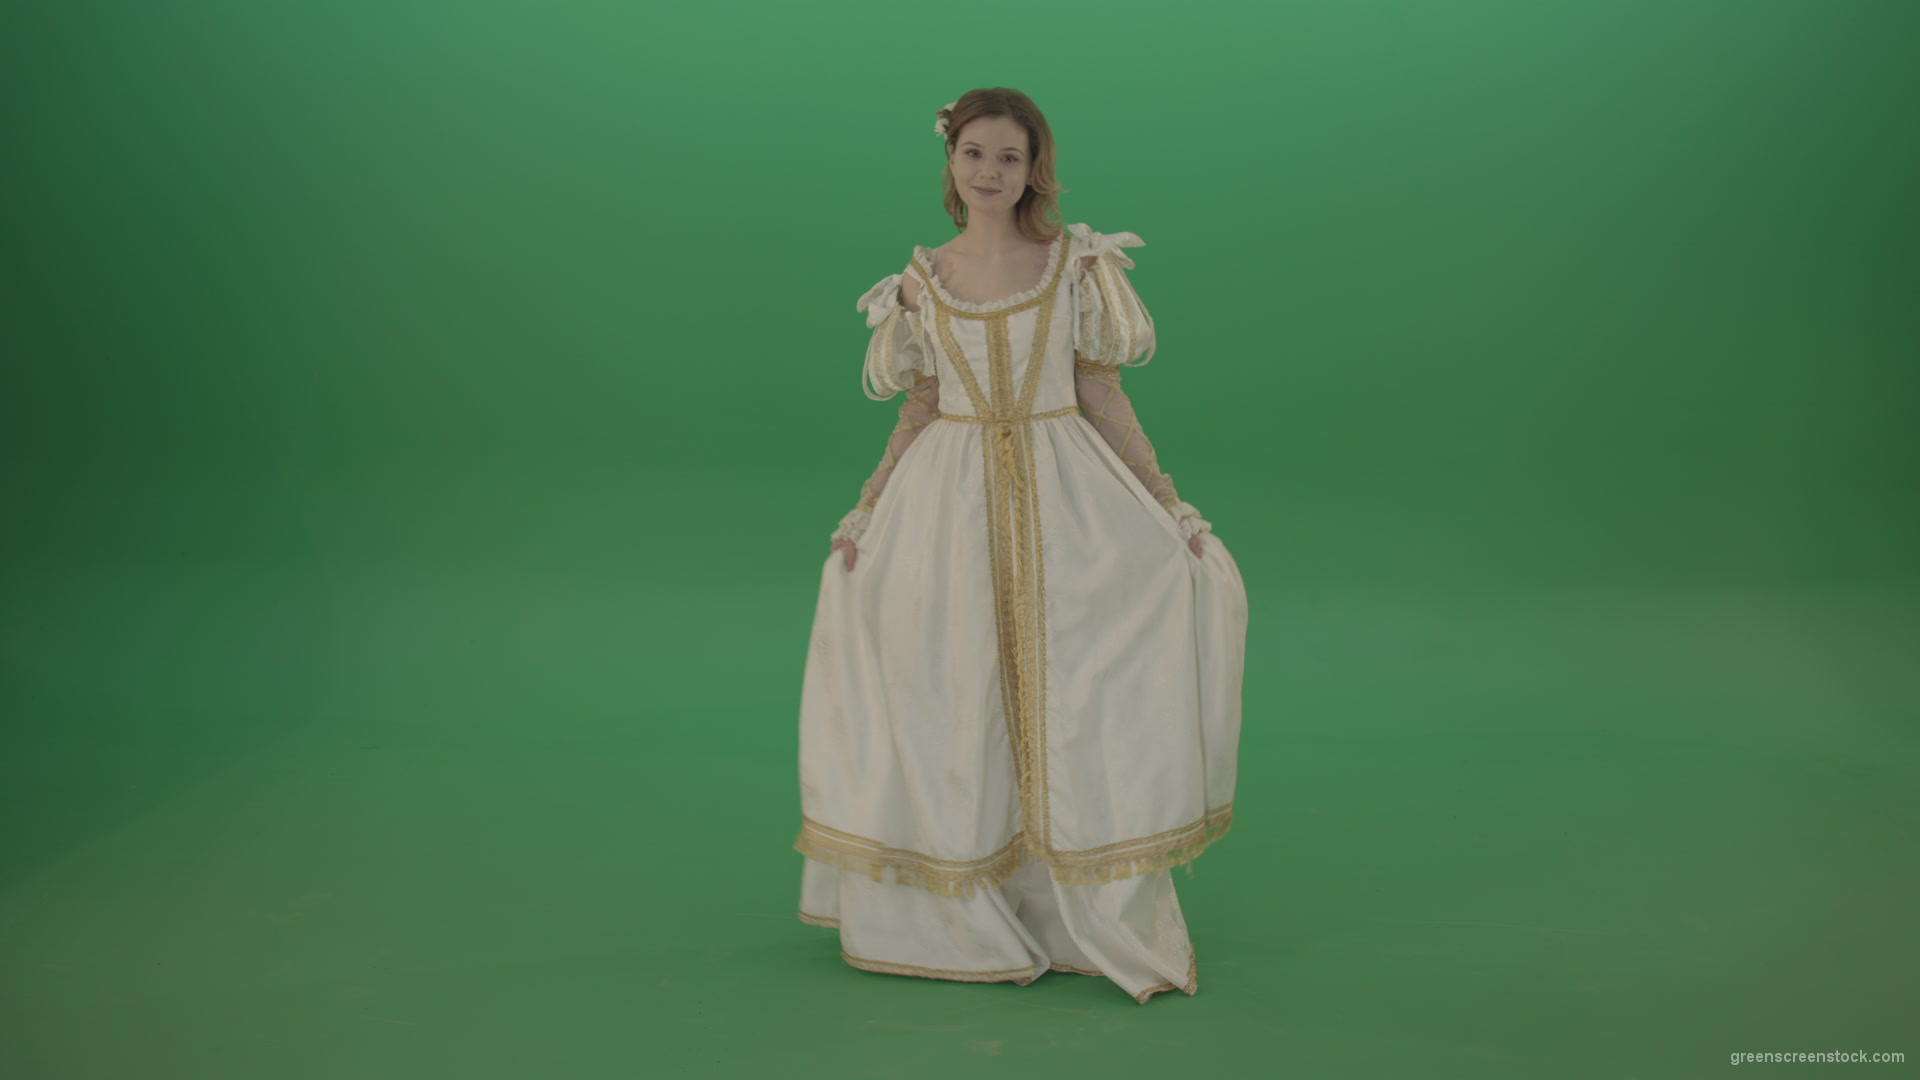 Girl-worships-from-side-to-side-dressed-in-white-dress-isolated-on-green-background_002 Green Screen Stock